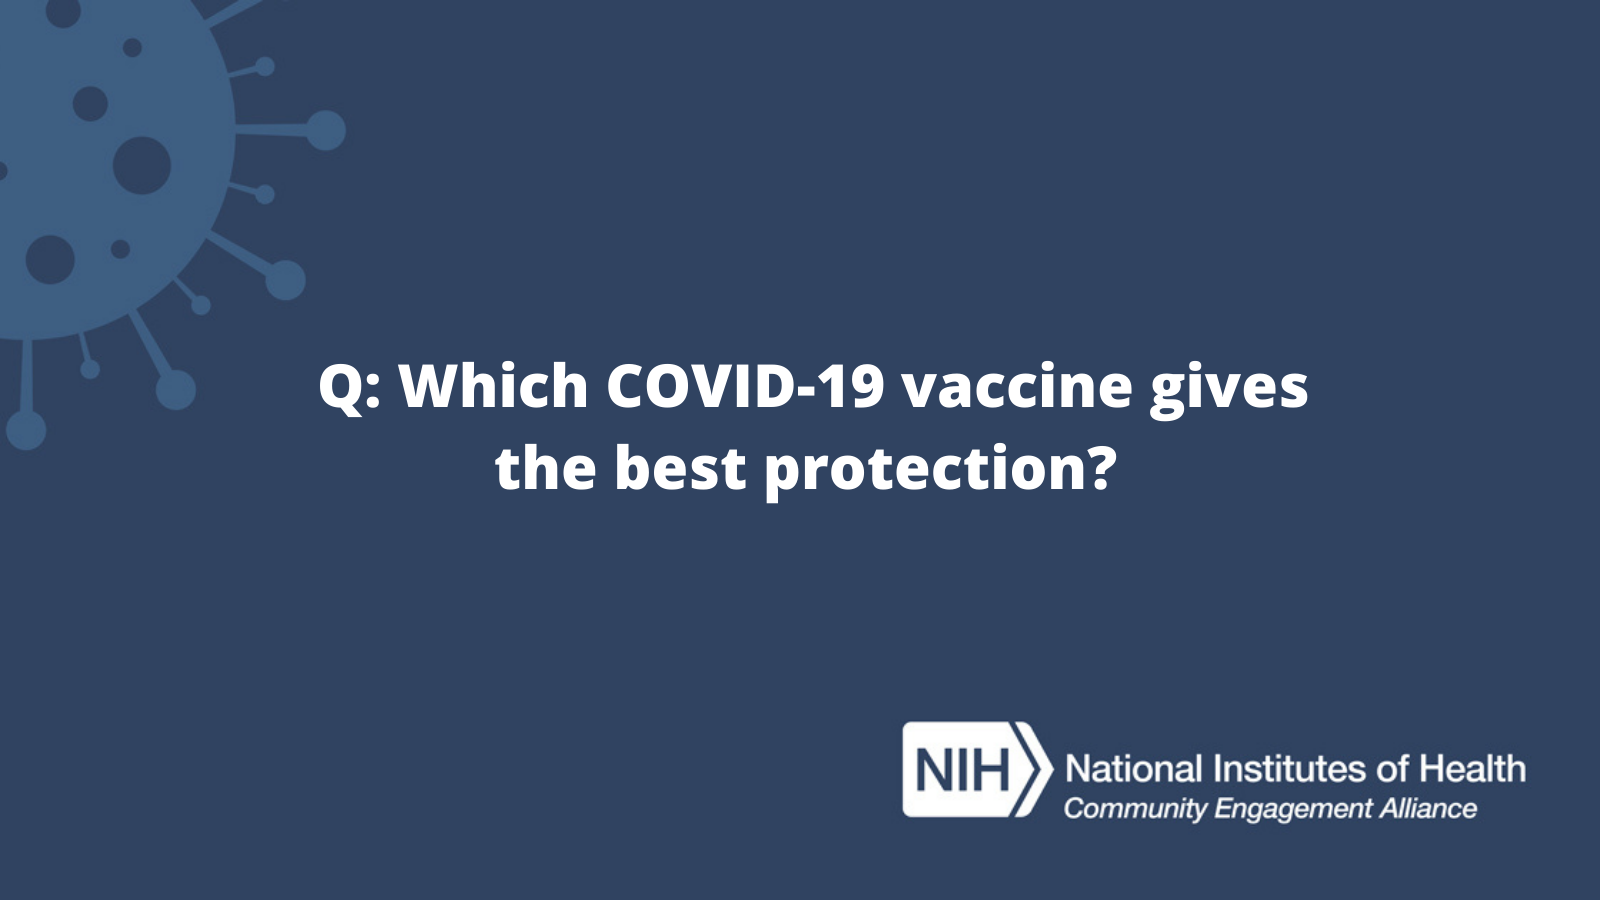 Q: Which COVID-19 vaccine gives the best protection? 